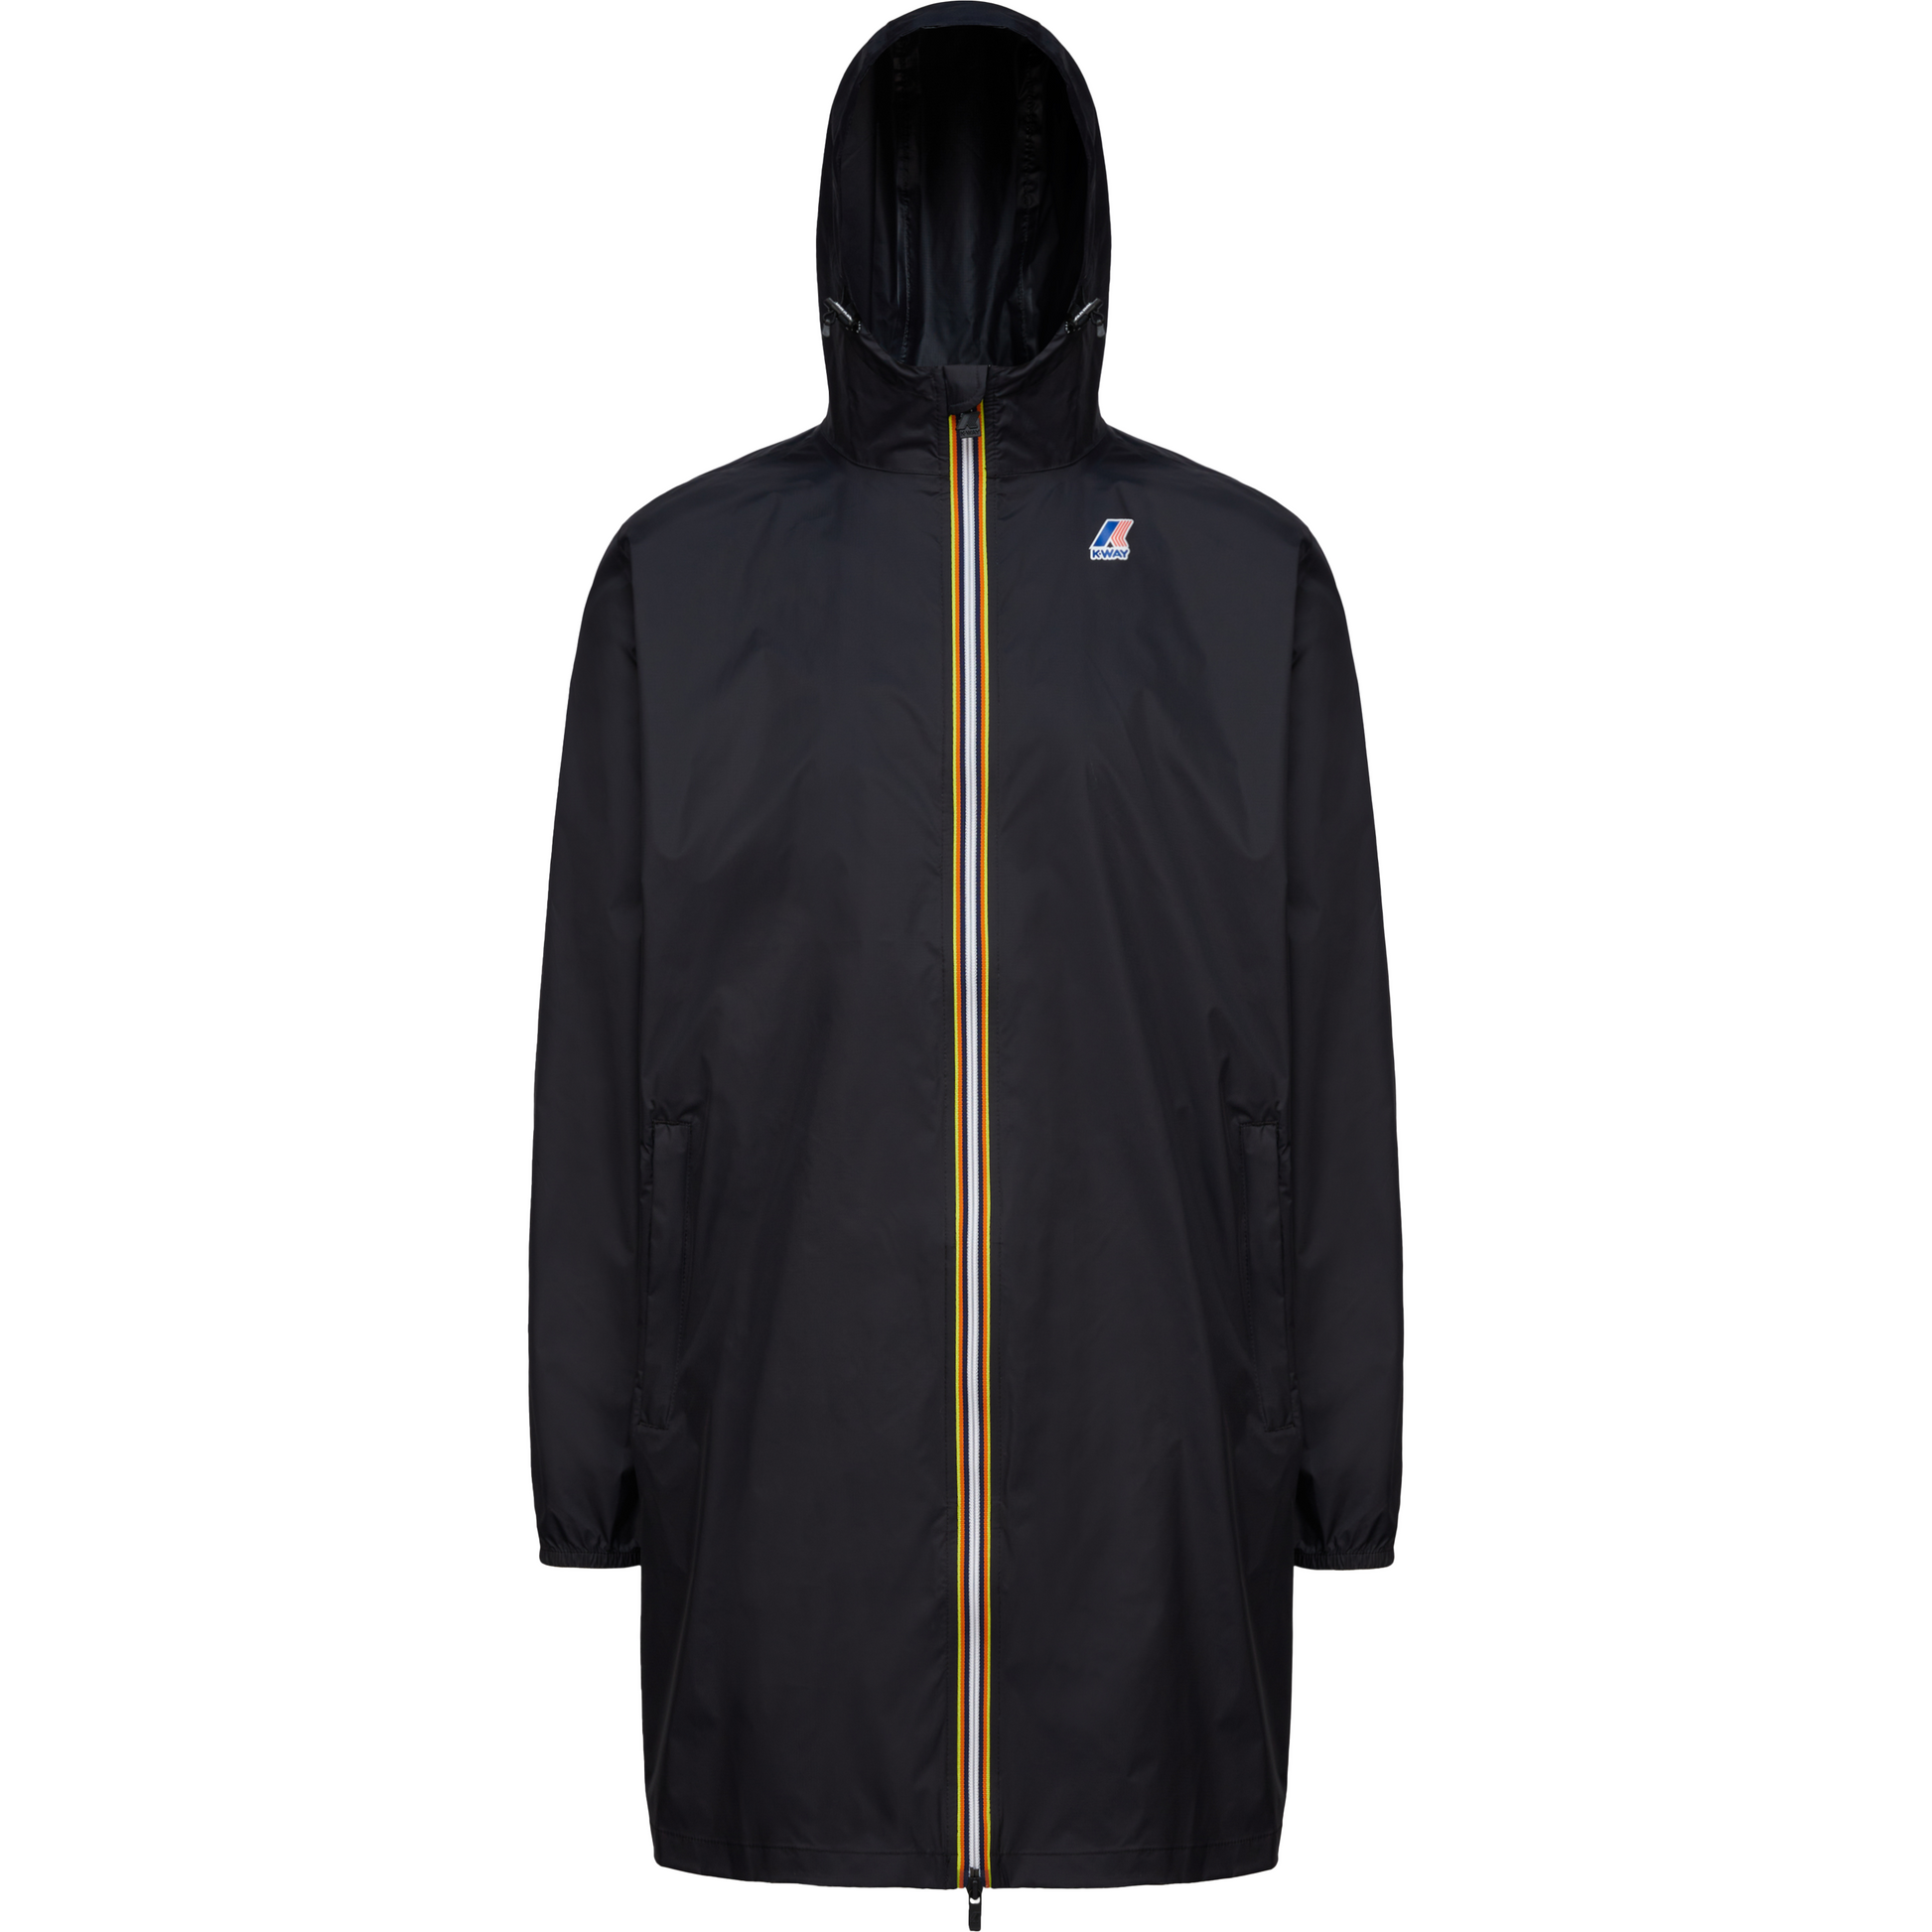 Black Le Vrai 3.0 Eiffel raincoat with a hood, crafted from waterproof, breathable ripstop fabric, featuring a visible yellow zipper running vertically down the front, branded with a small logo on the chest by K-Way.